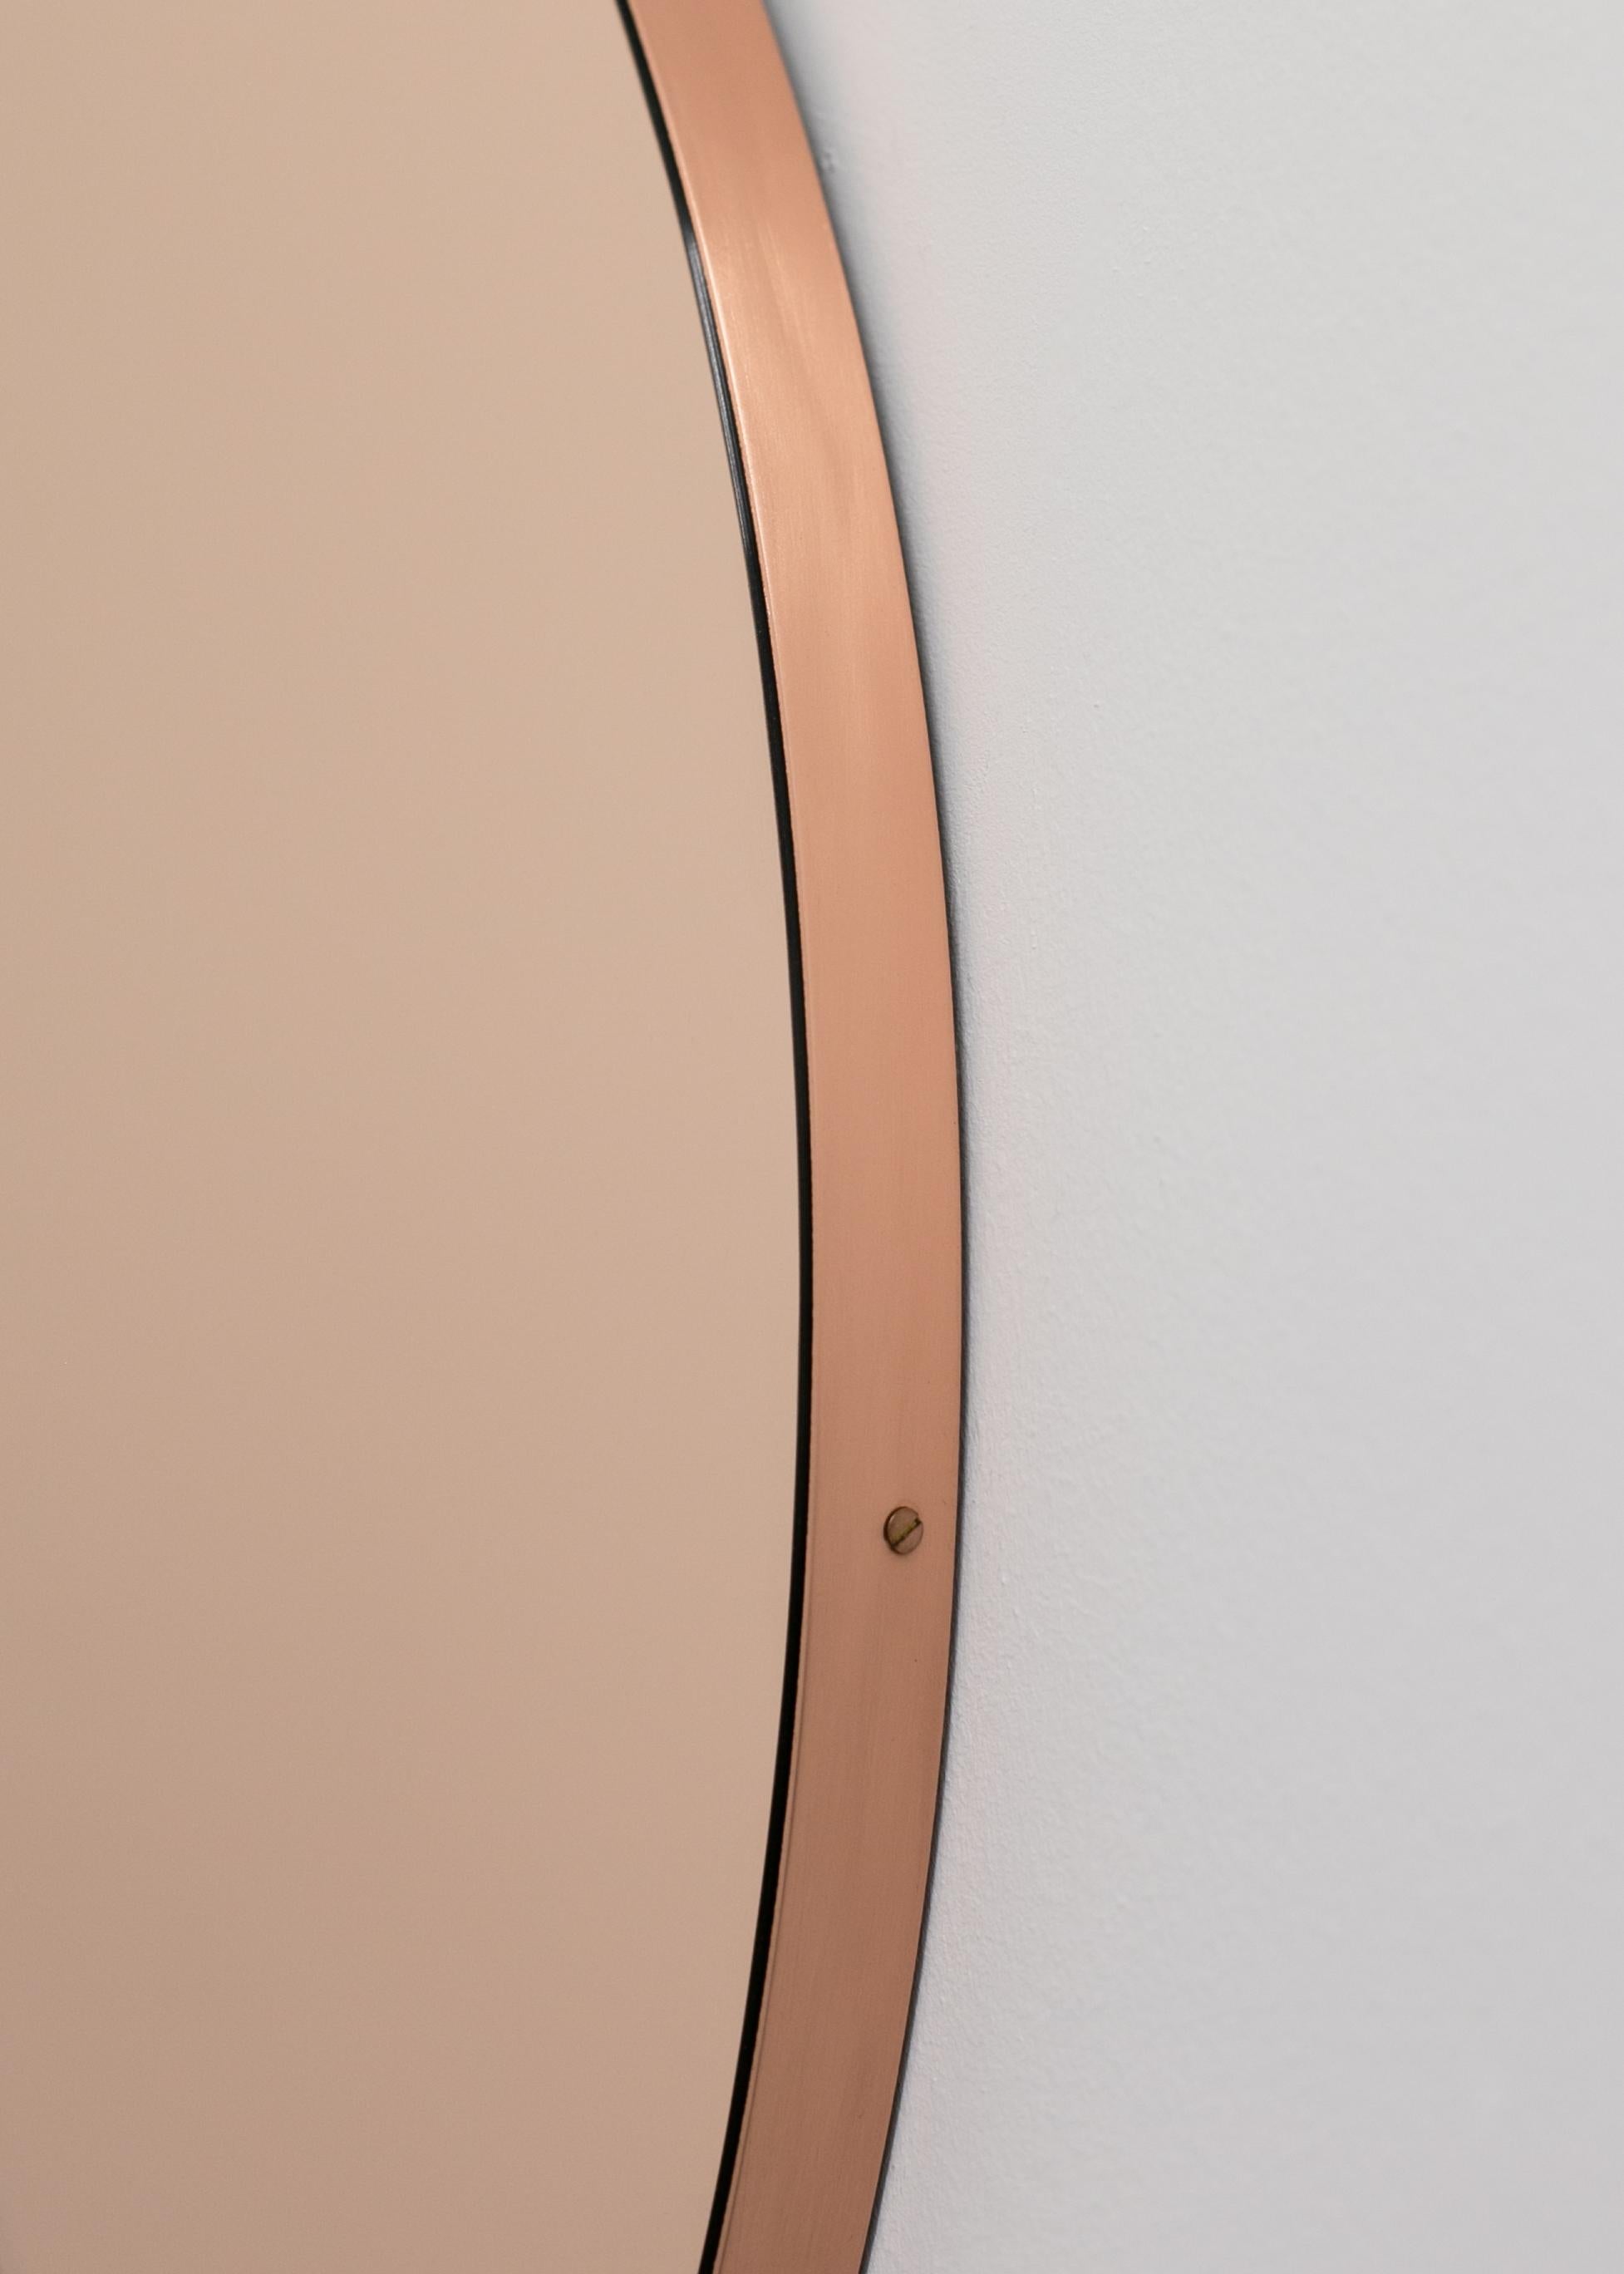 Brushed Ovalis Oval shaped Rose Gold Contemporary Mirror with a Copper Frame, Medium For Sale